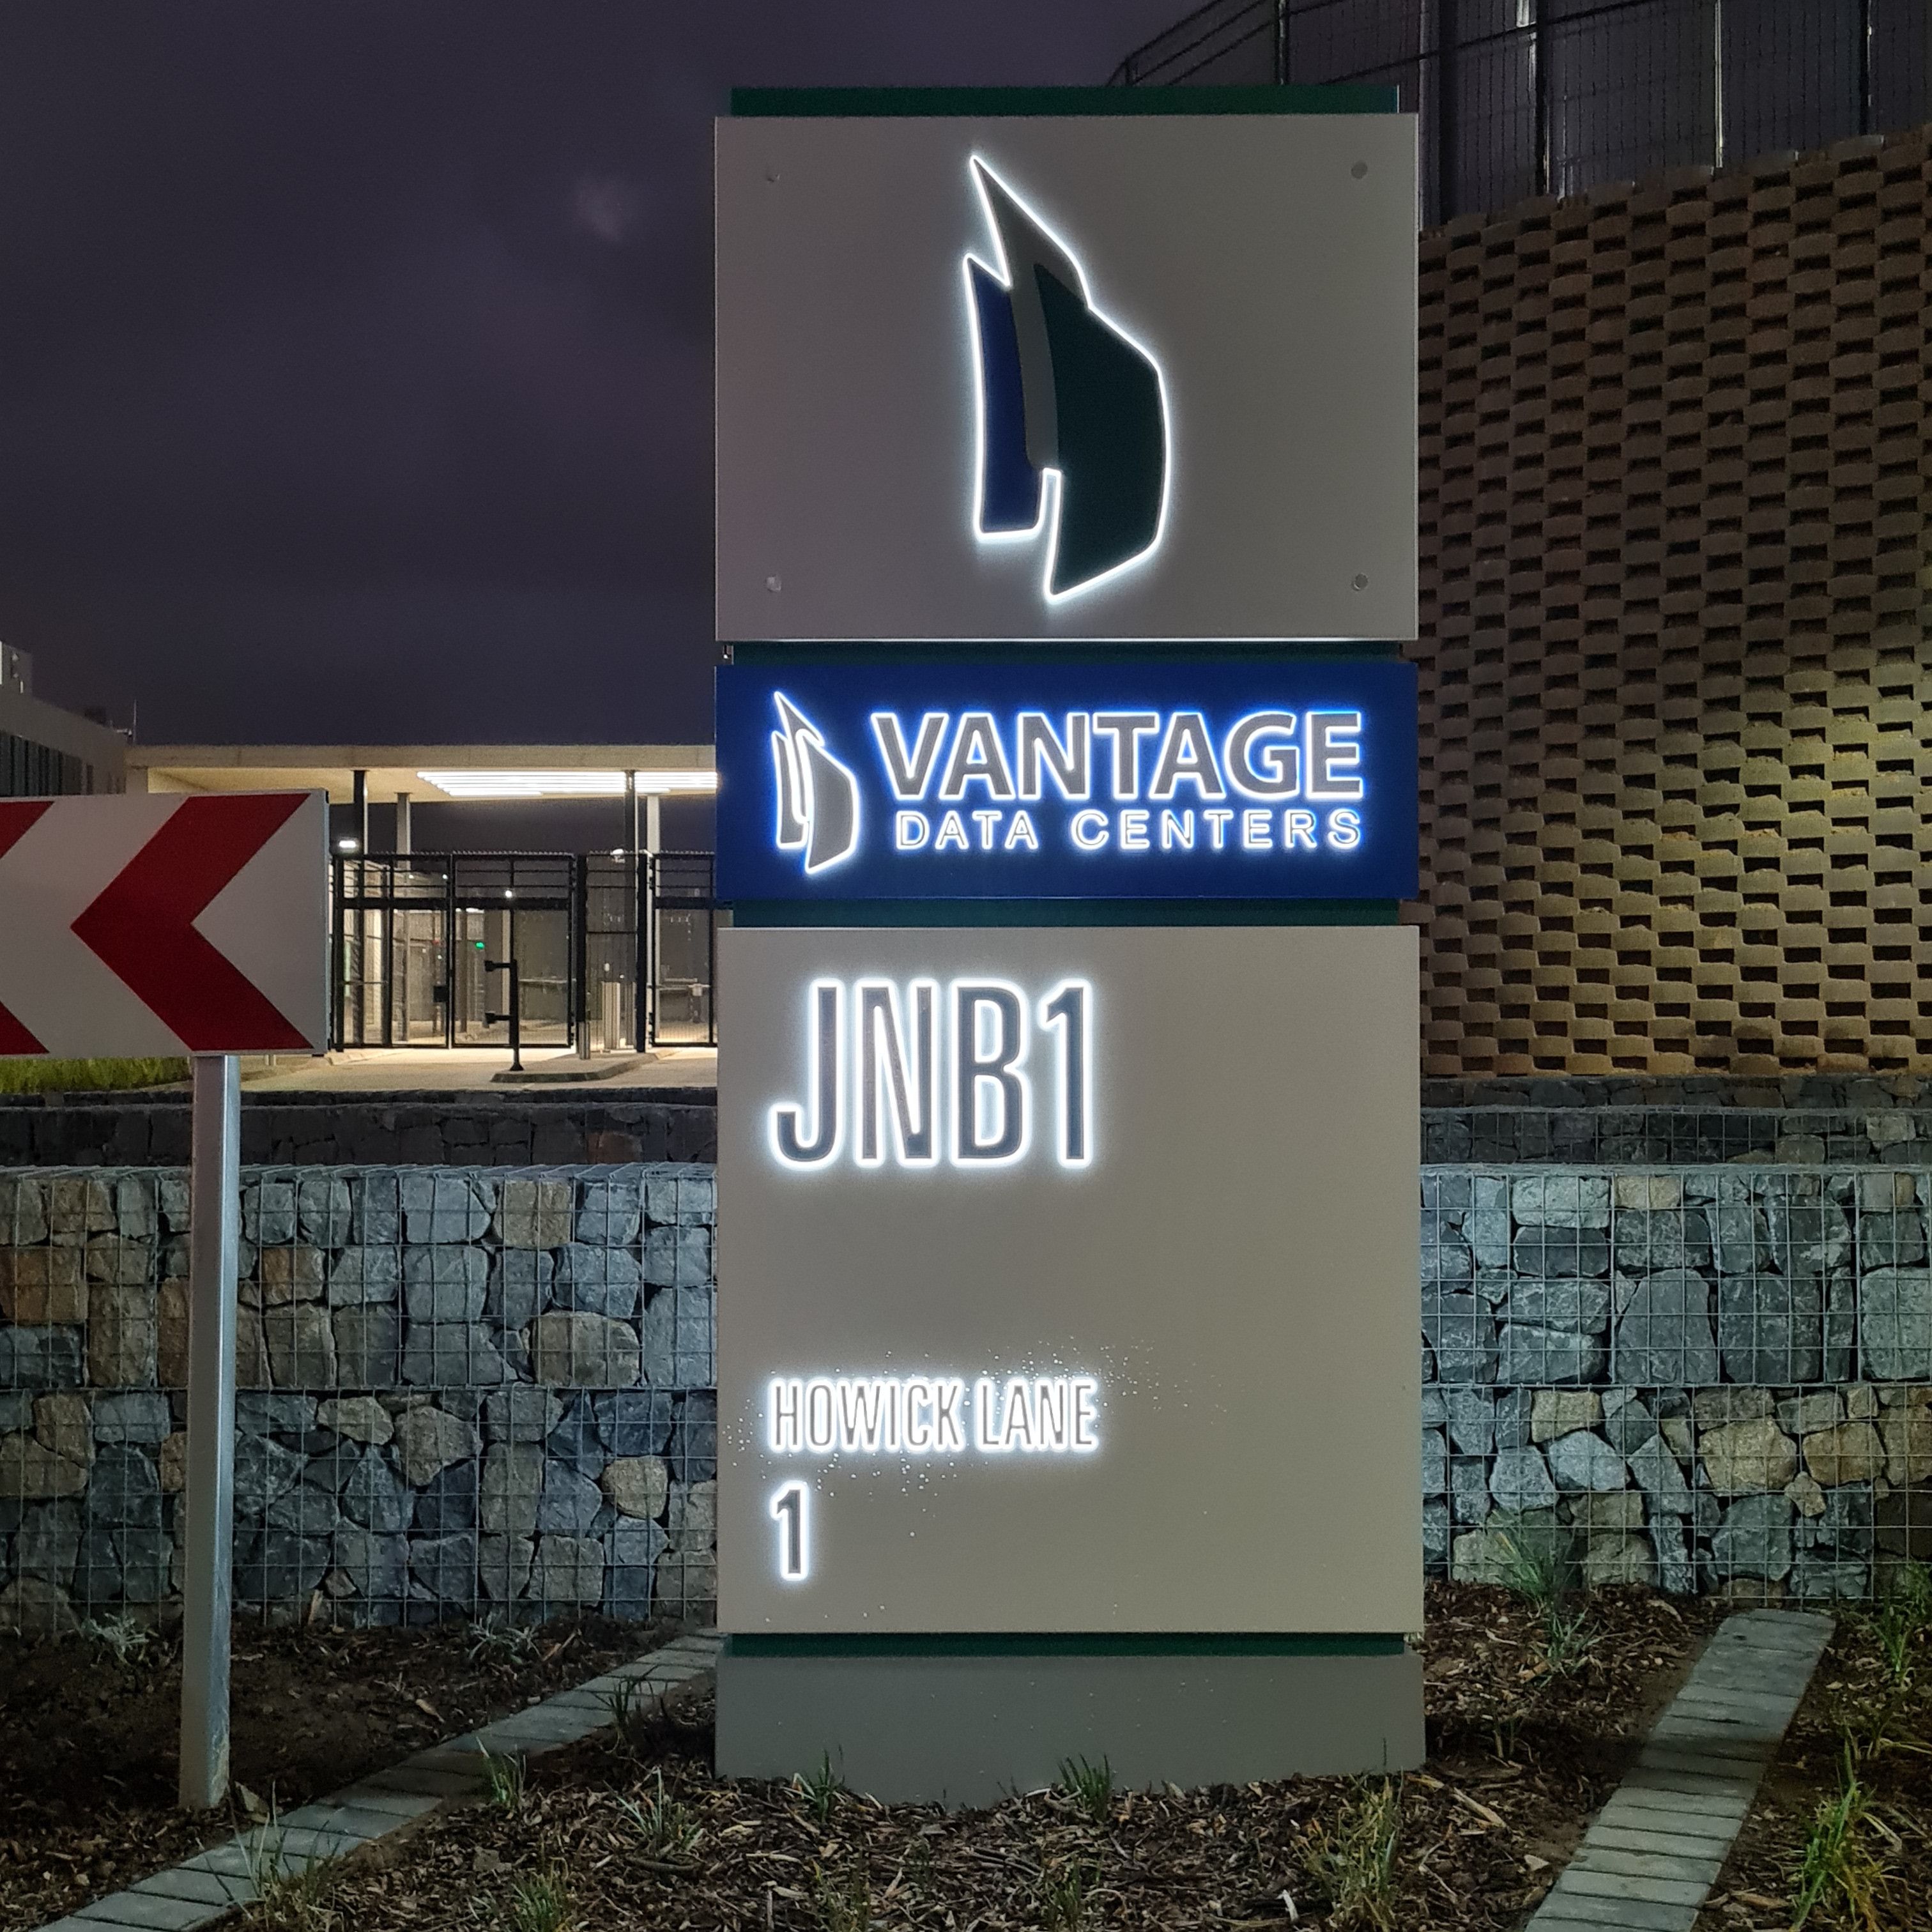 Illuminated signage for Vantage Data Centers, as part of their wider company sign installation.